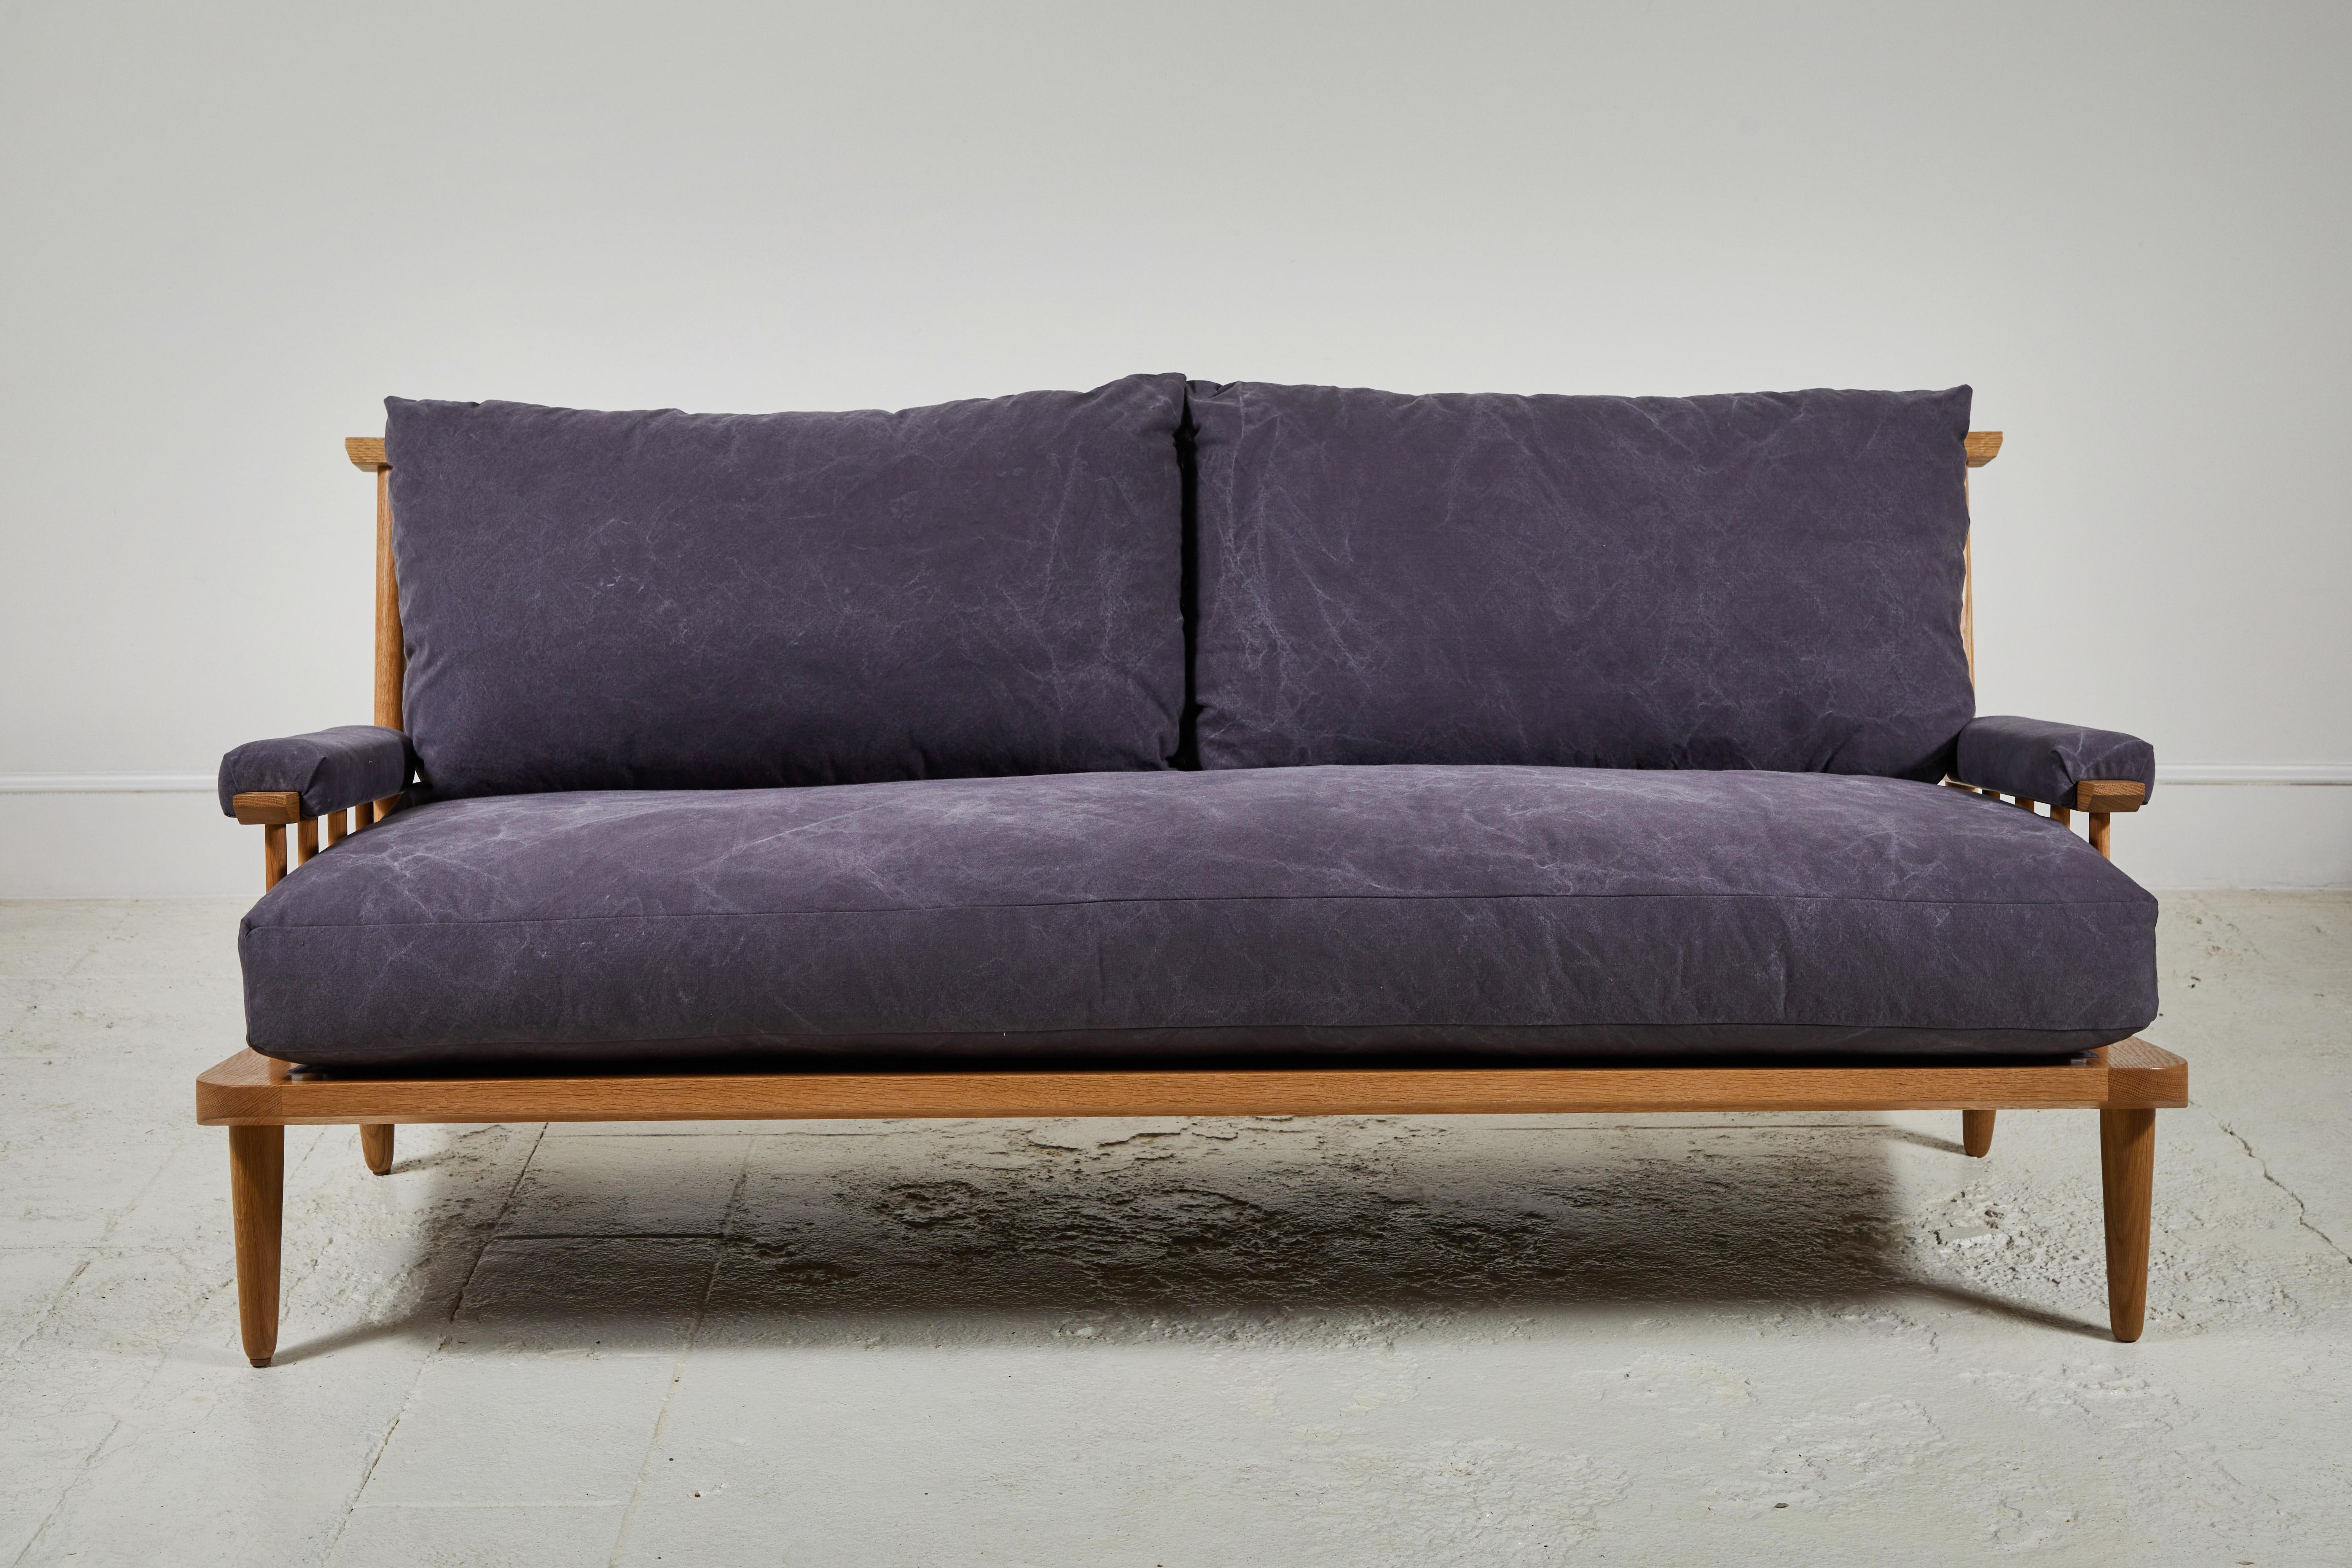 An open silhouette creates a lightweight feeling revealing expert craftsmanship and sophisticated design. Gentle back pitch cushioned by down and feather wrapped high density foam core cushions offer deep repose and generosity for lounging. This